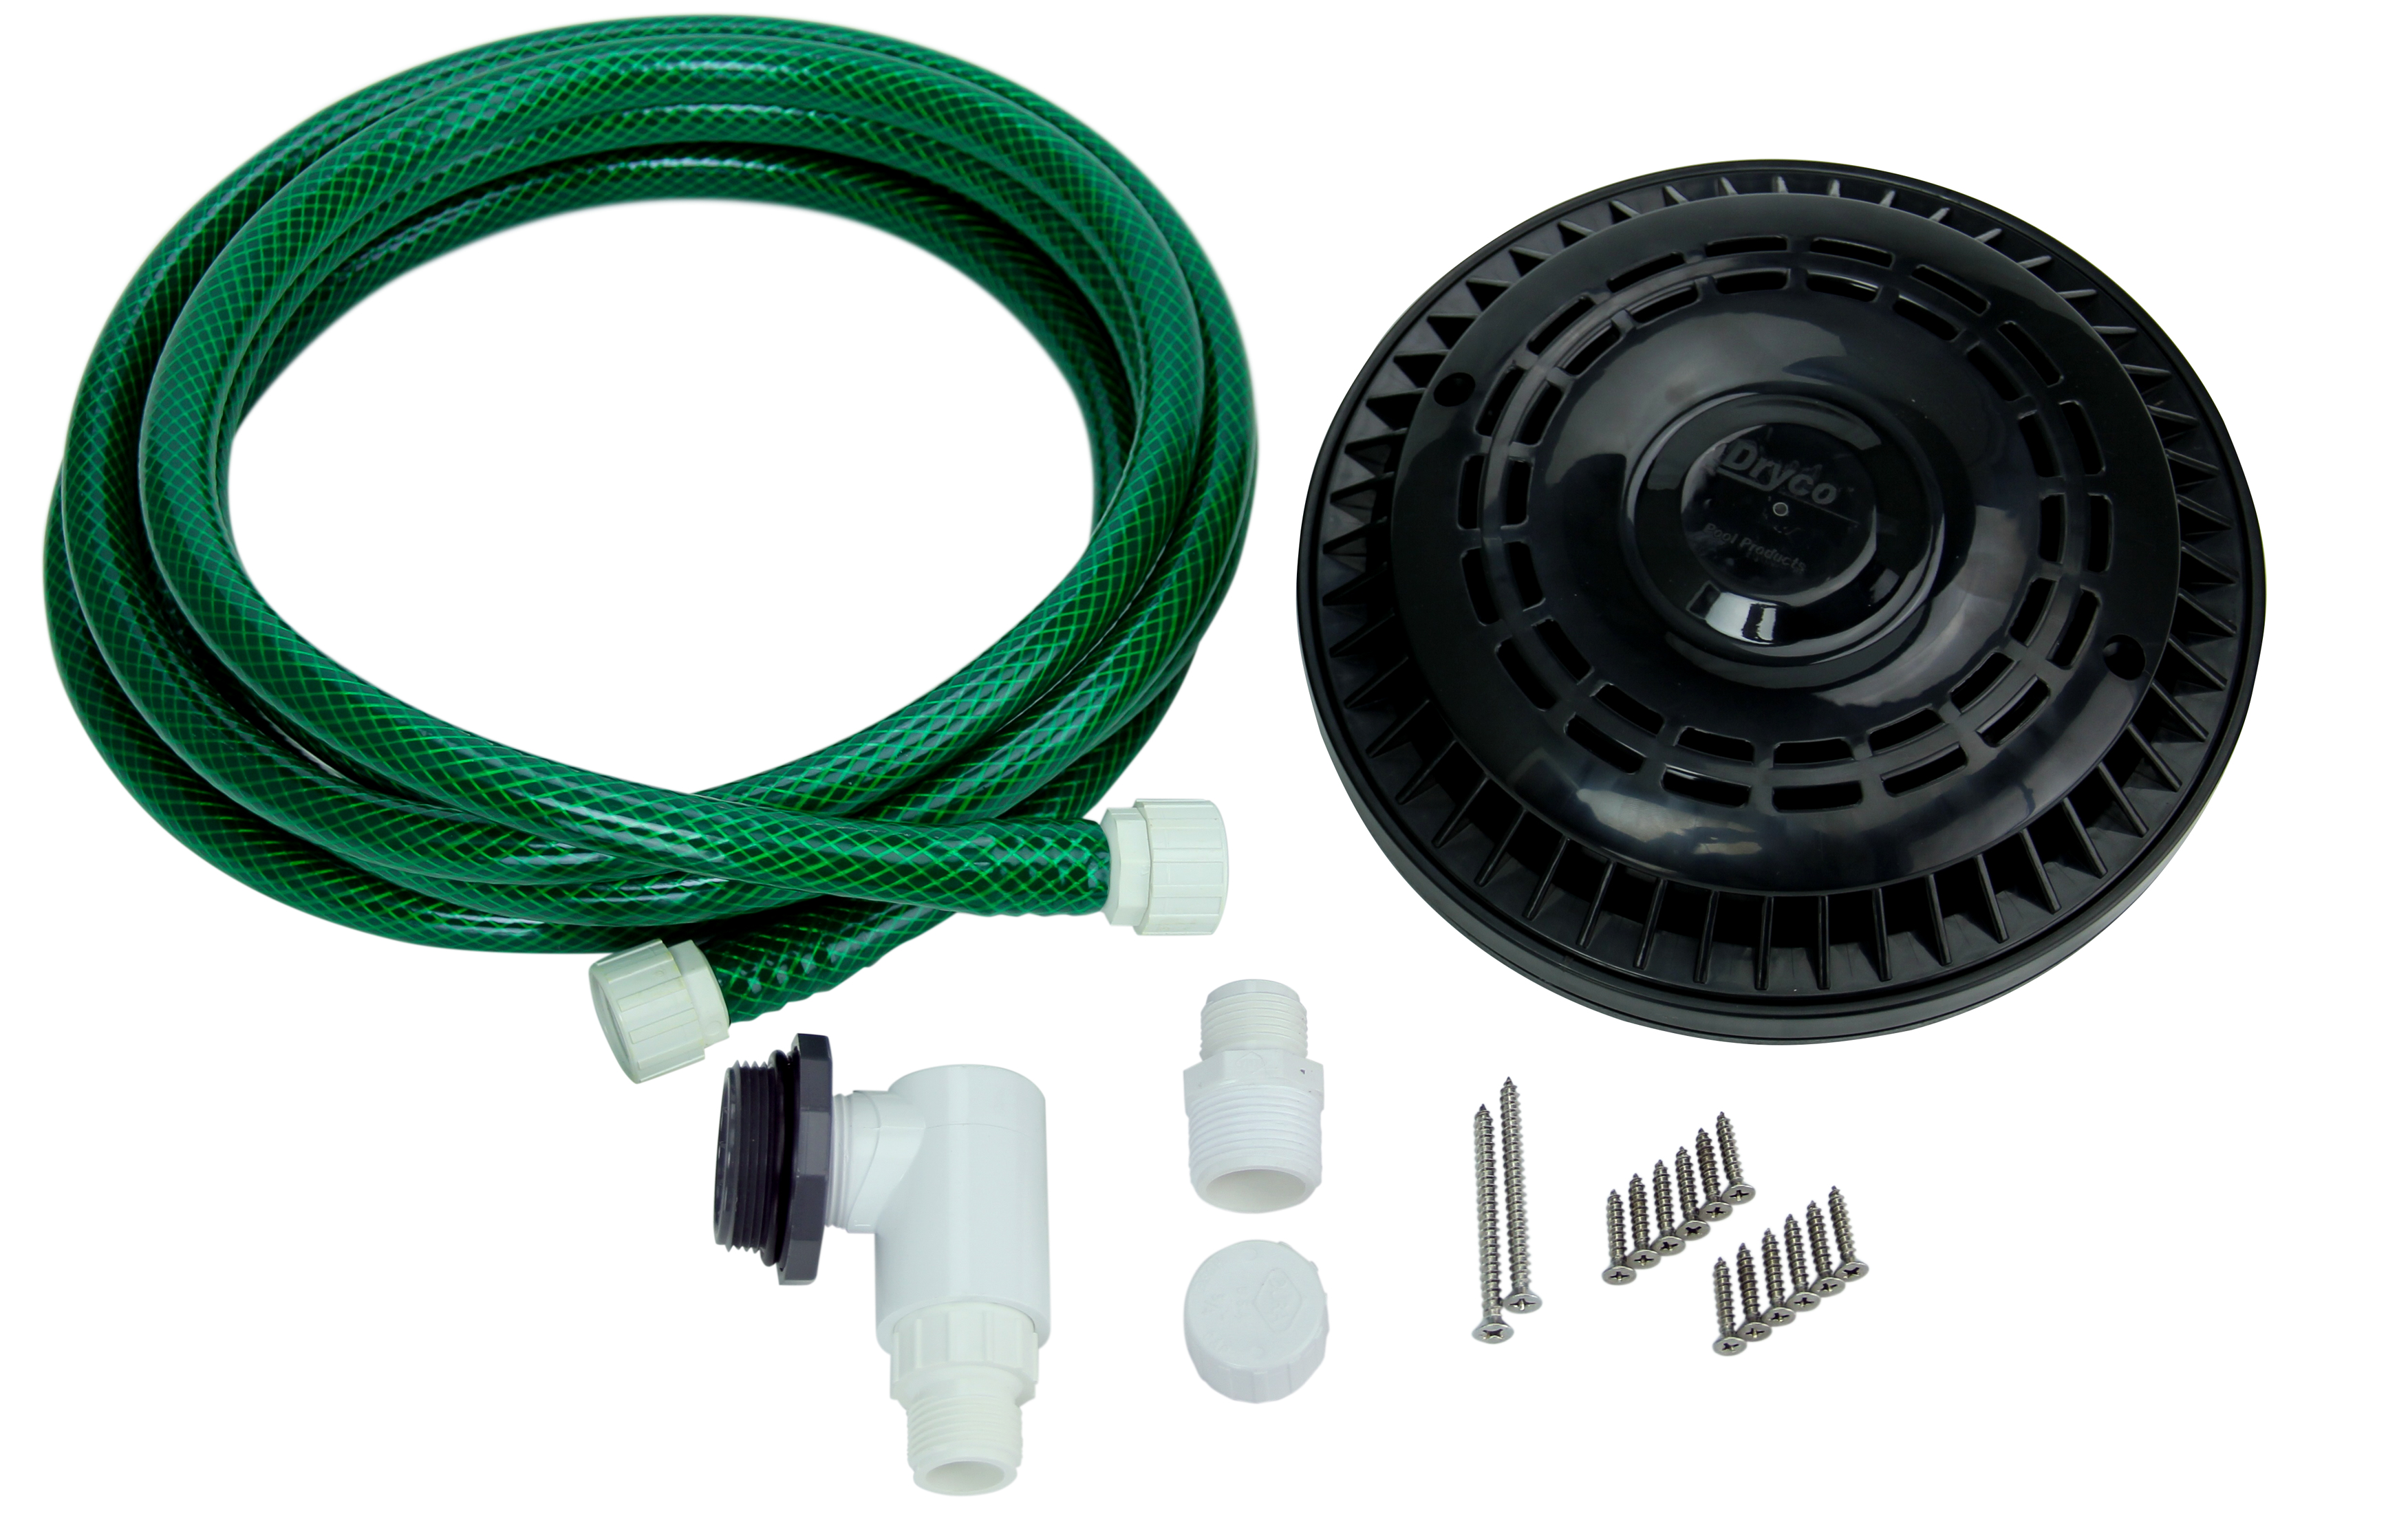 Dryco Above Ground Swimming Pool Winter Cover Pump Drain System 689076608794 | eBay How To Drain An Above Ground Pool With A Pump